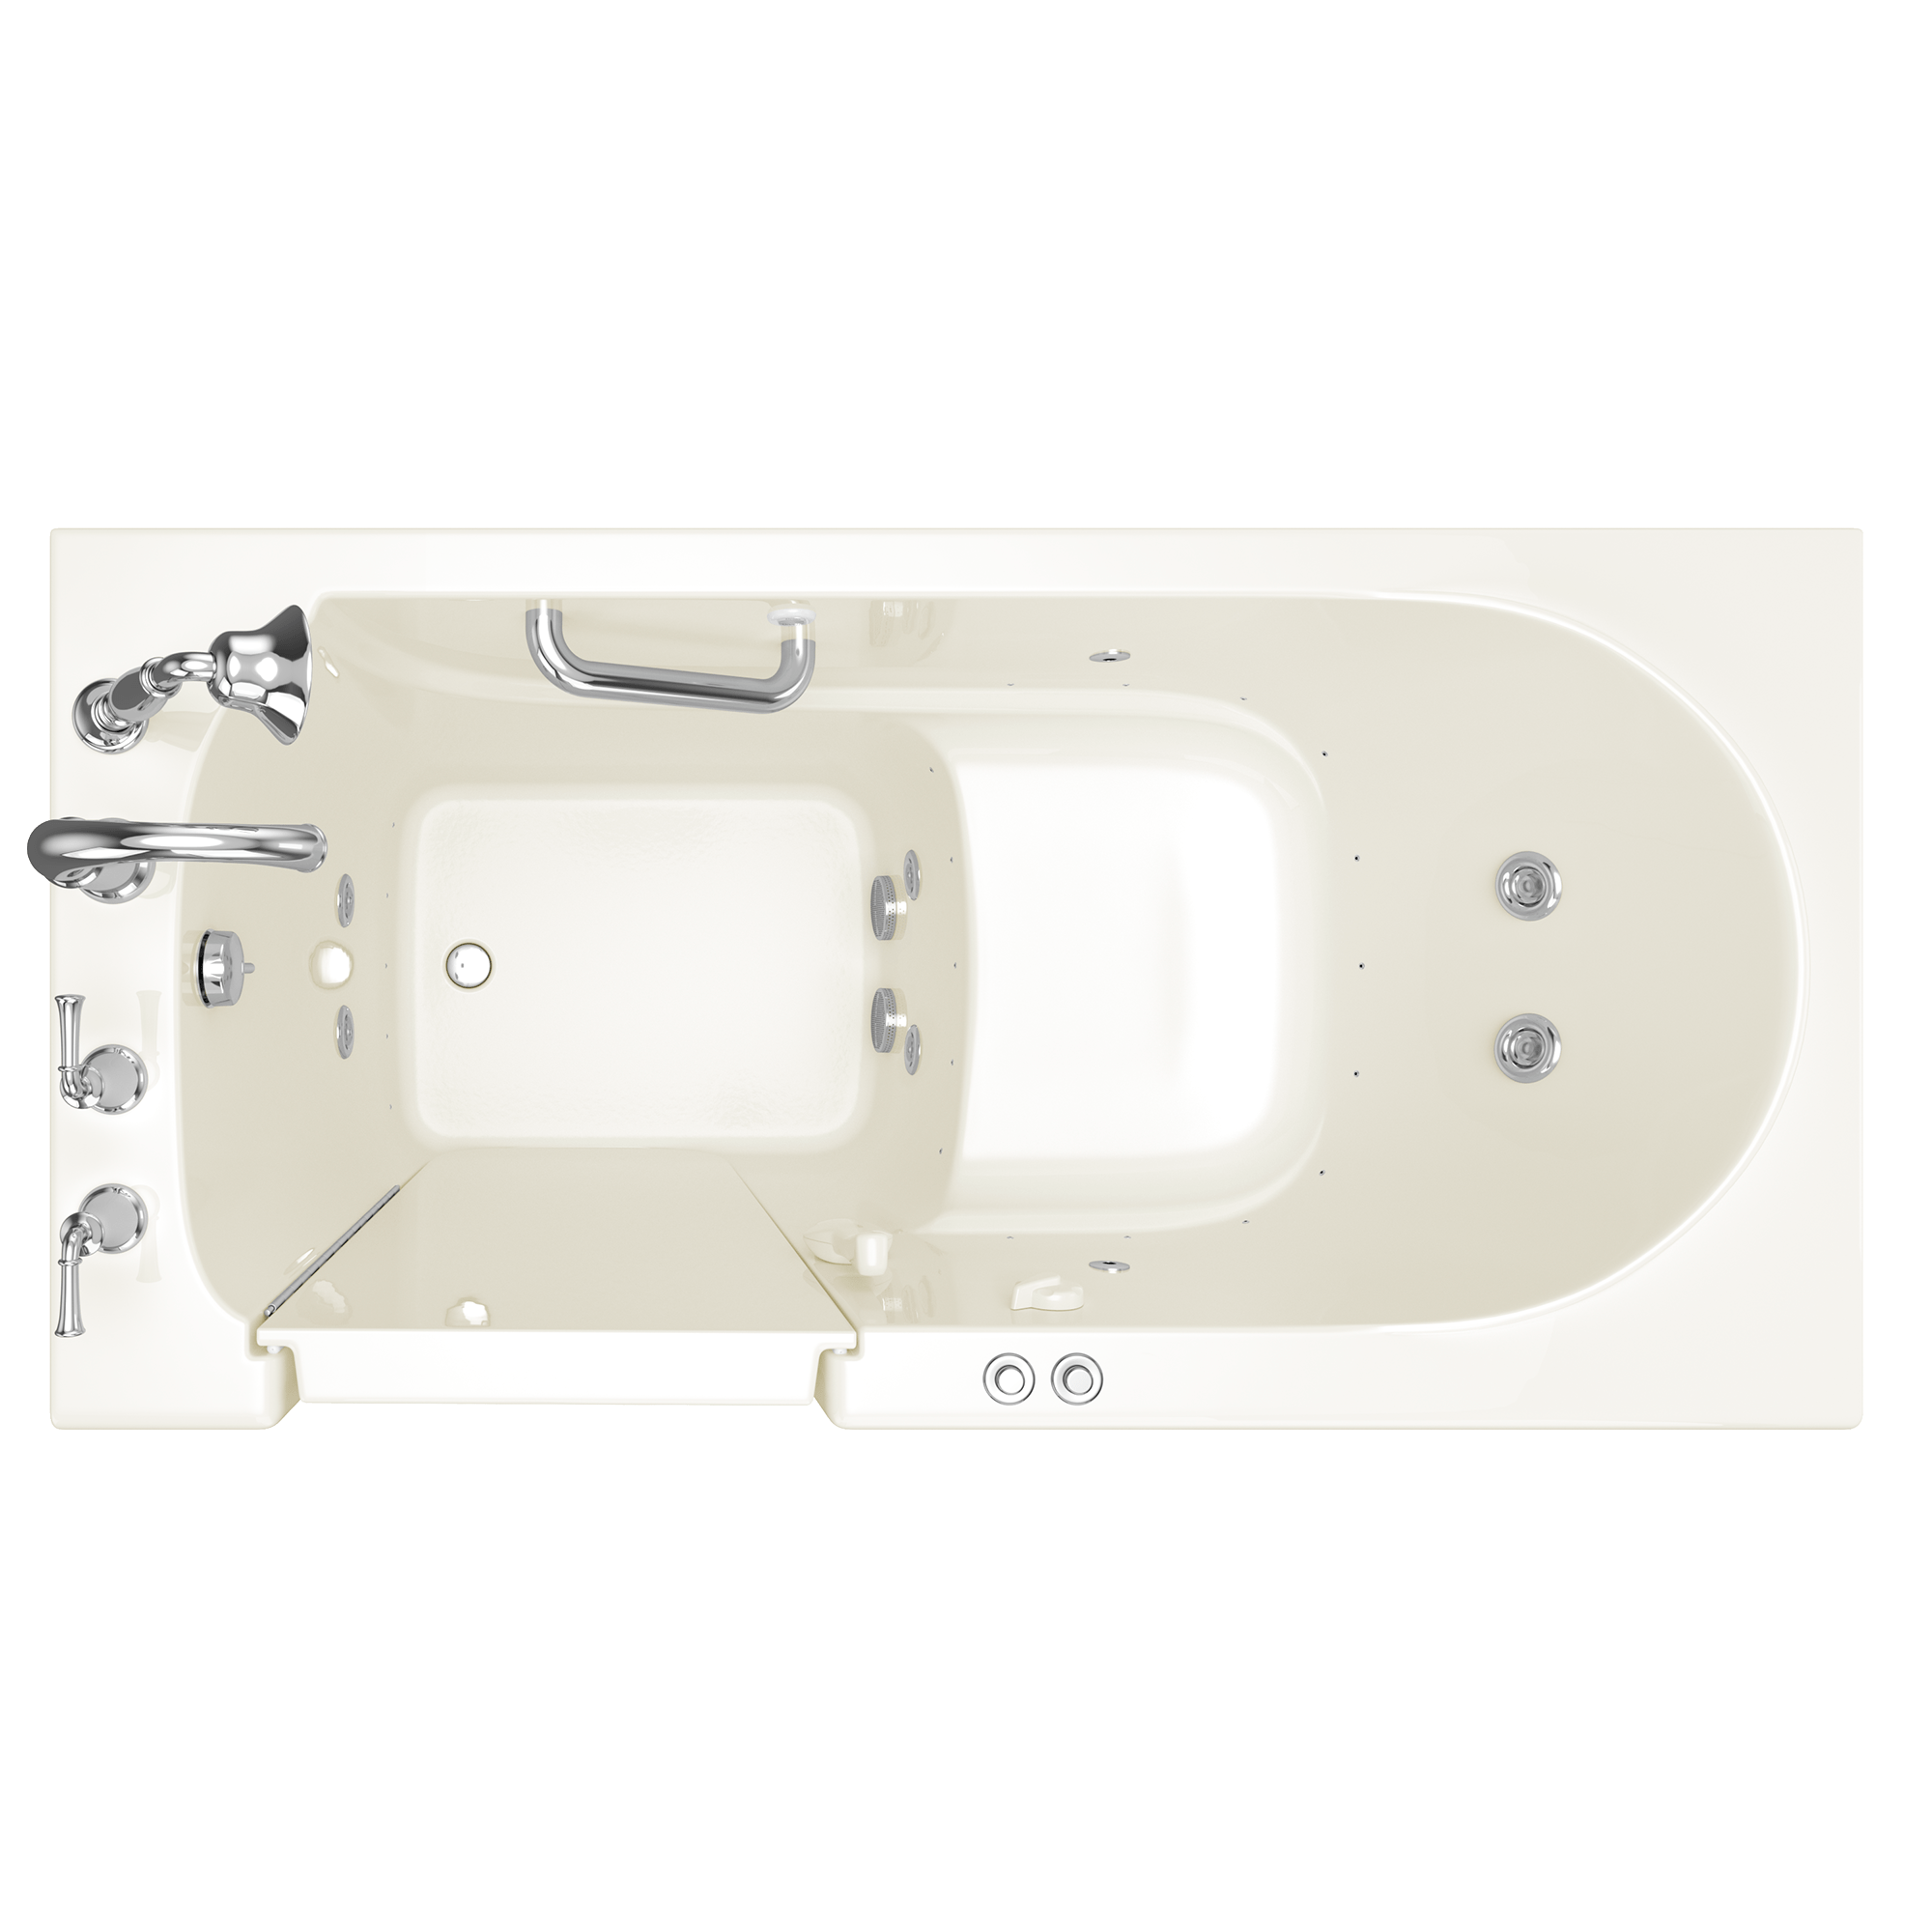 Gelcoat Value Series 60x30-Inch Walk-In Bathtub with Combination Whirlpool and Air Spa System - Left Hand Door and Drain